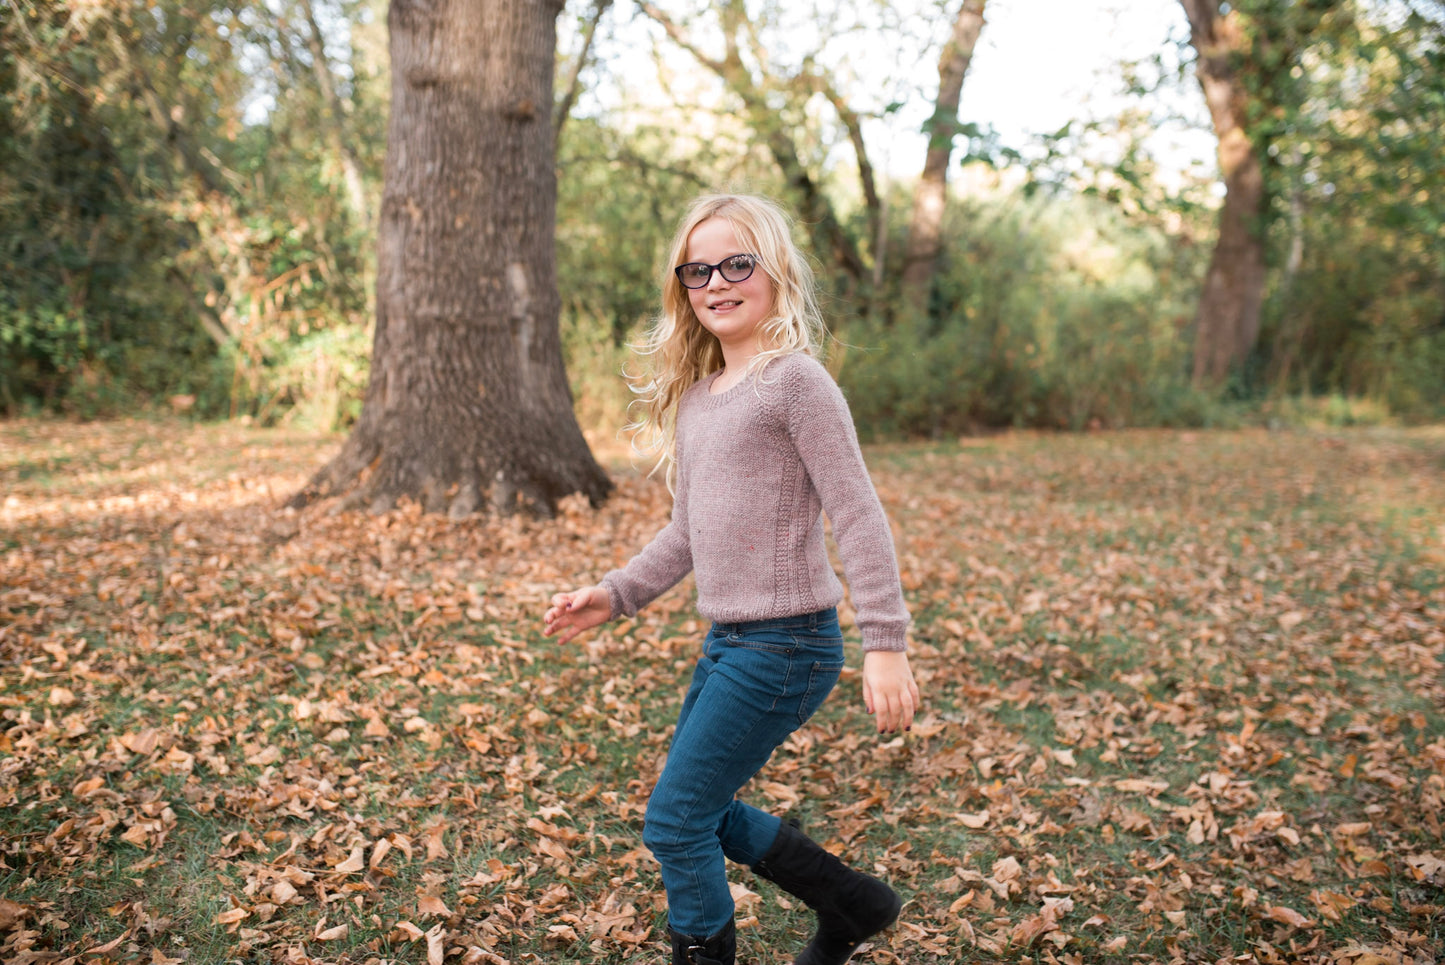 A young blonde girl walks through a park in autumn. She wears a hand knit light purple sweater, designed with a subtle garter stitch embellishment around the seams, with blue jeans and black boots.